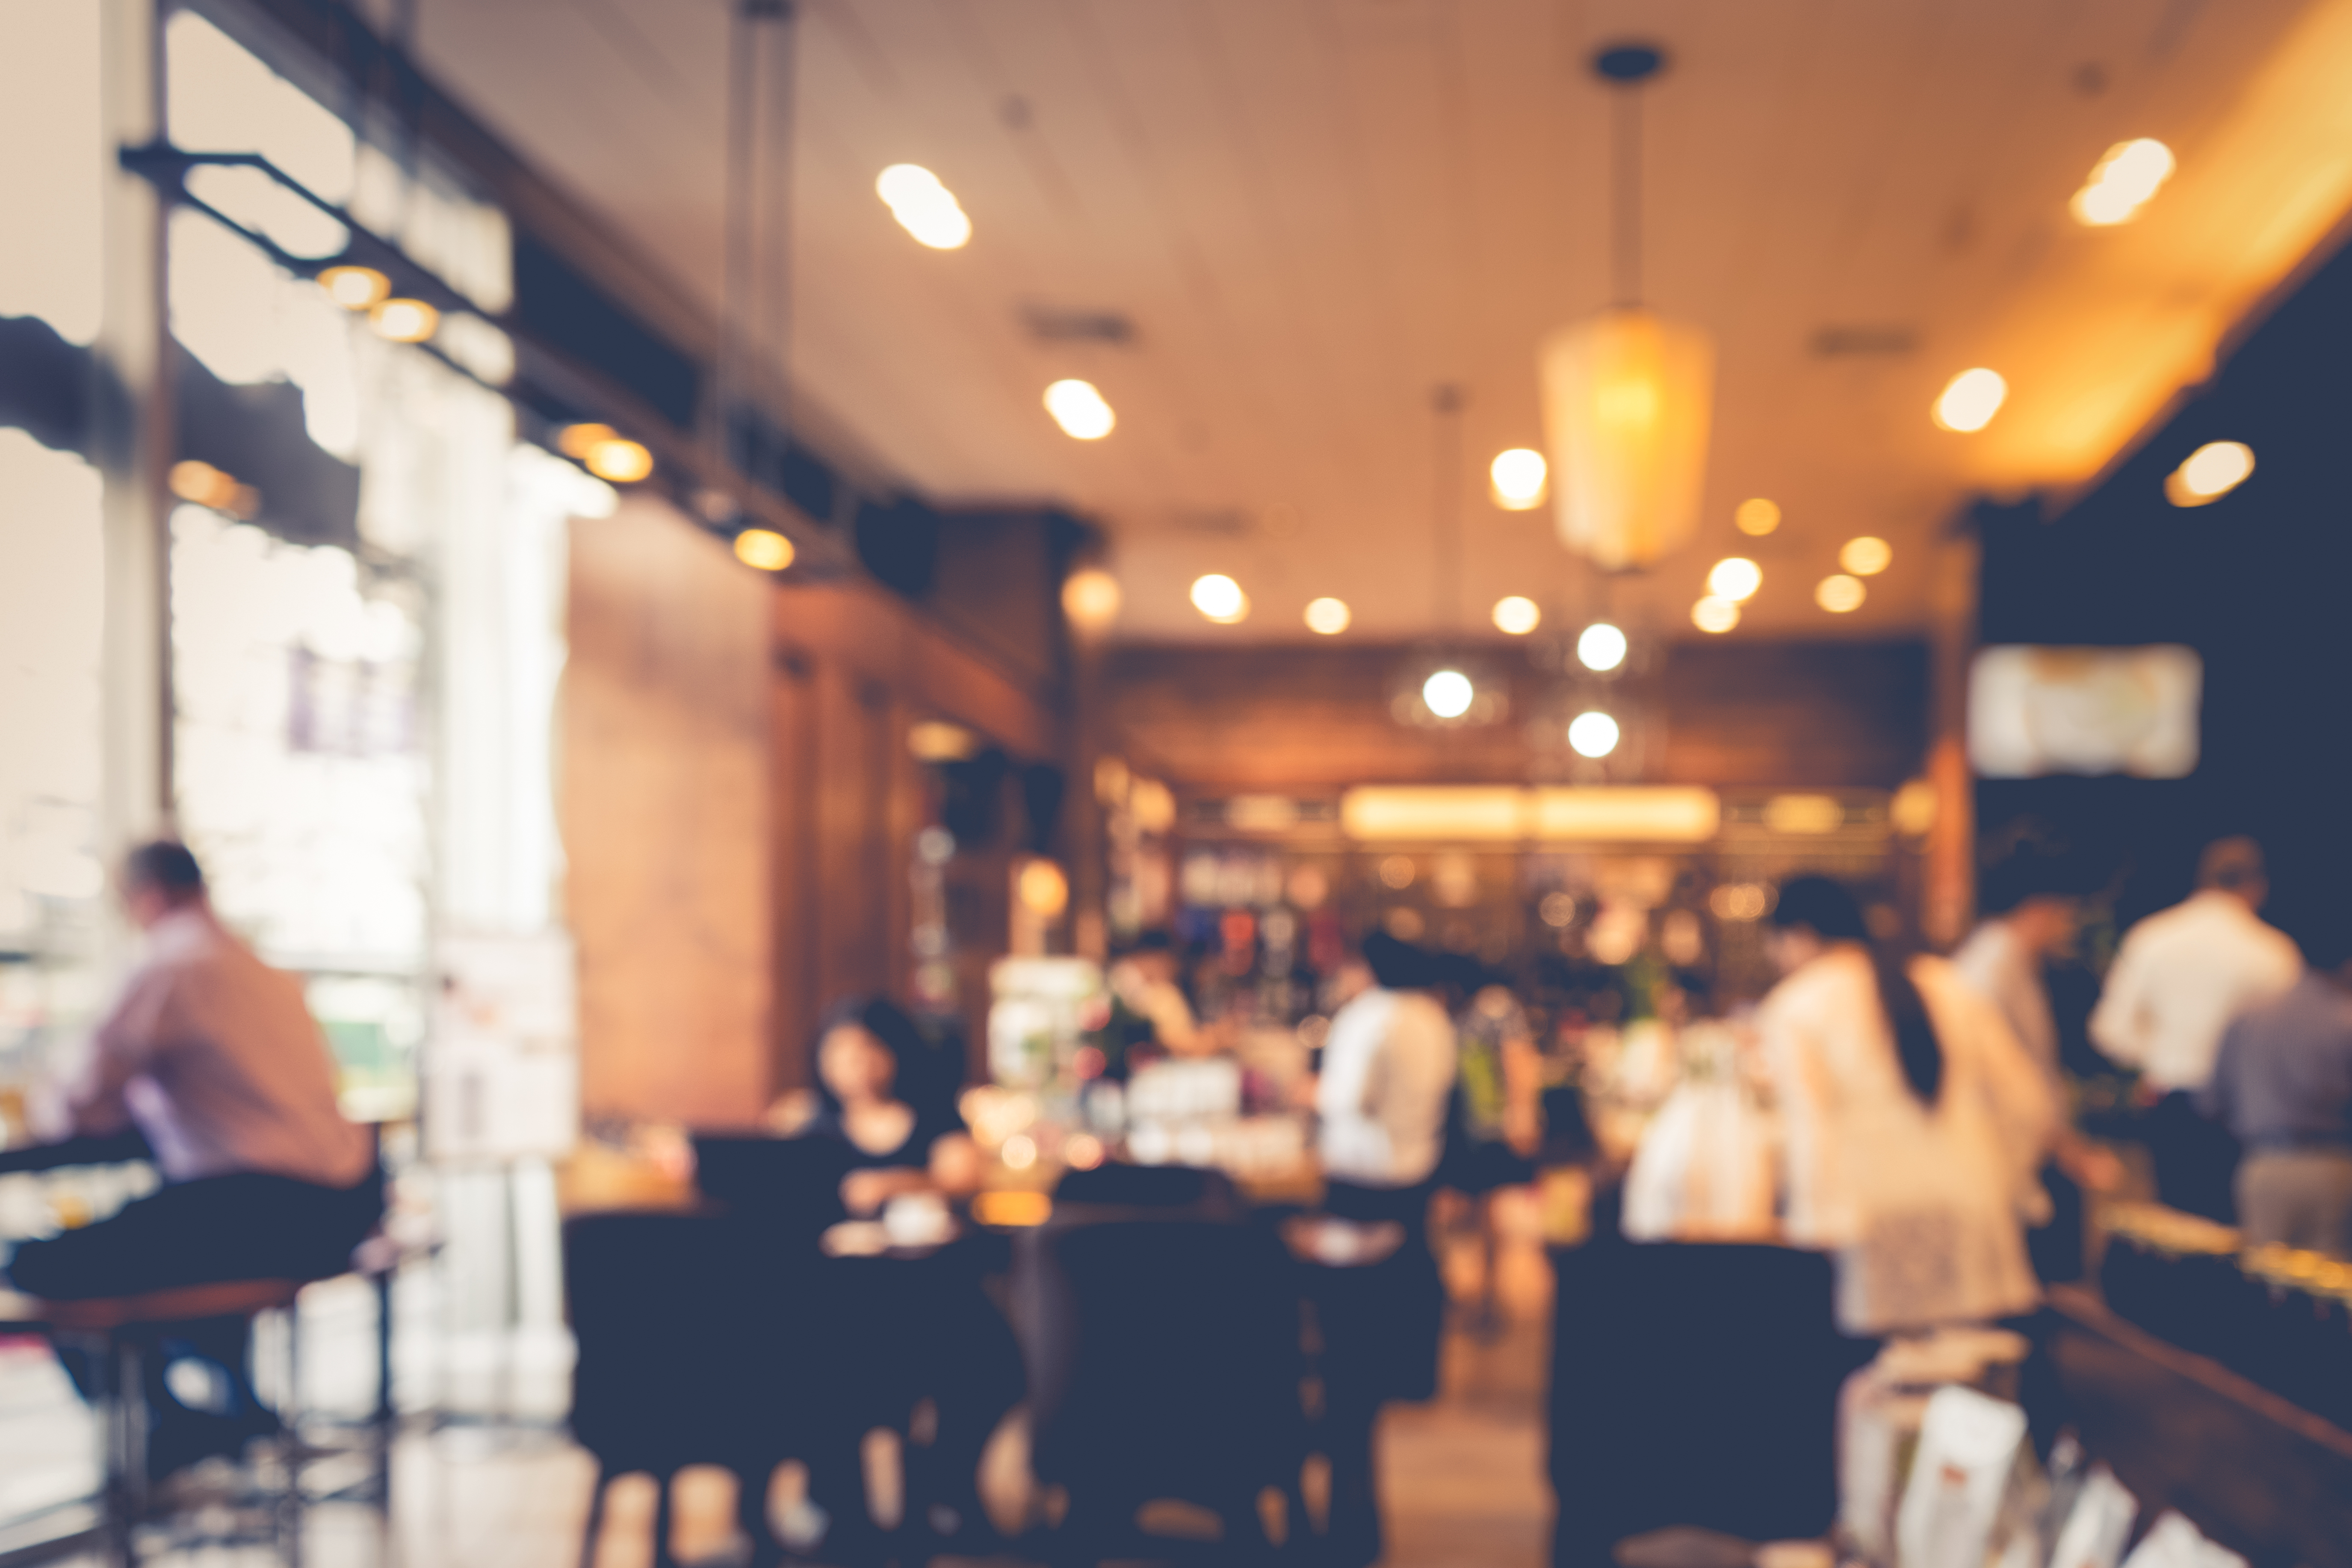 Blur coffee shop or cafe restaurant with abstract bokeh light image background. | Source: Shutterstockd.